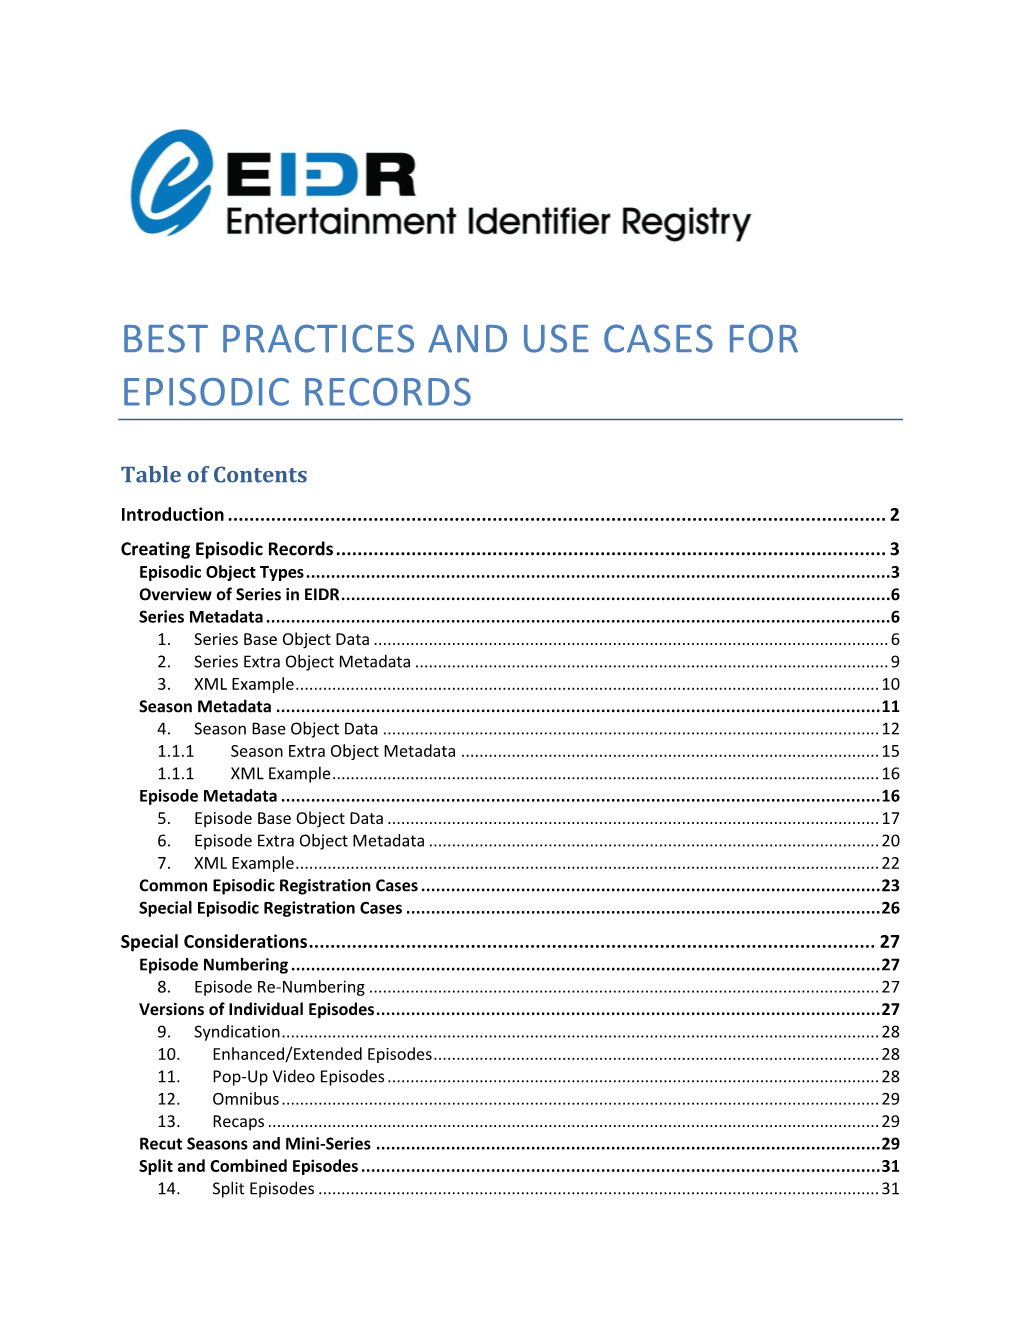 Best Practices and Use Cases for Episodic Records